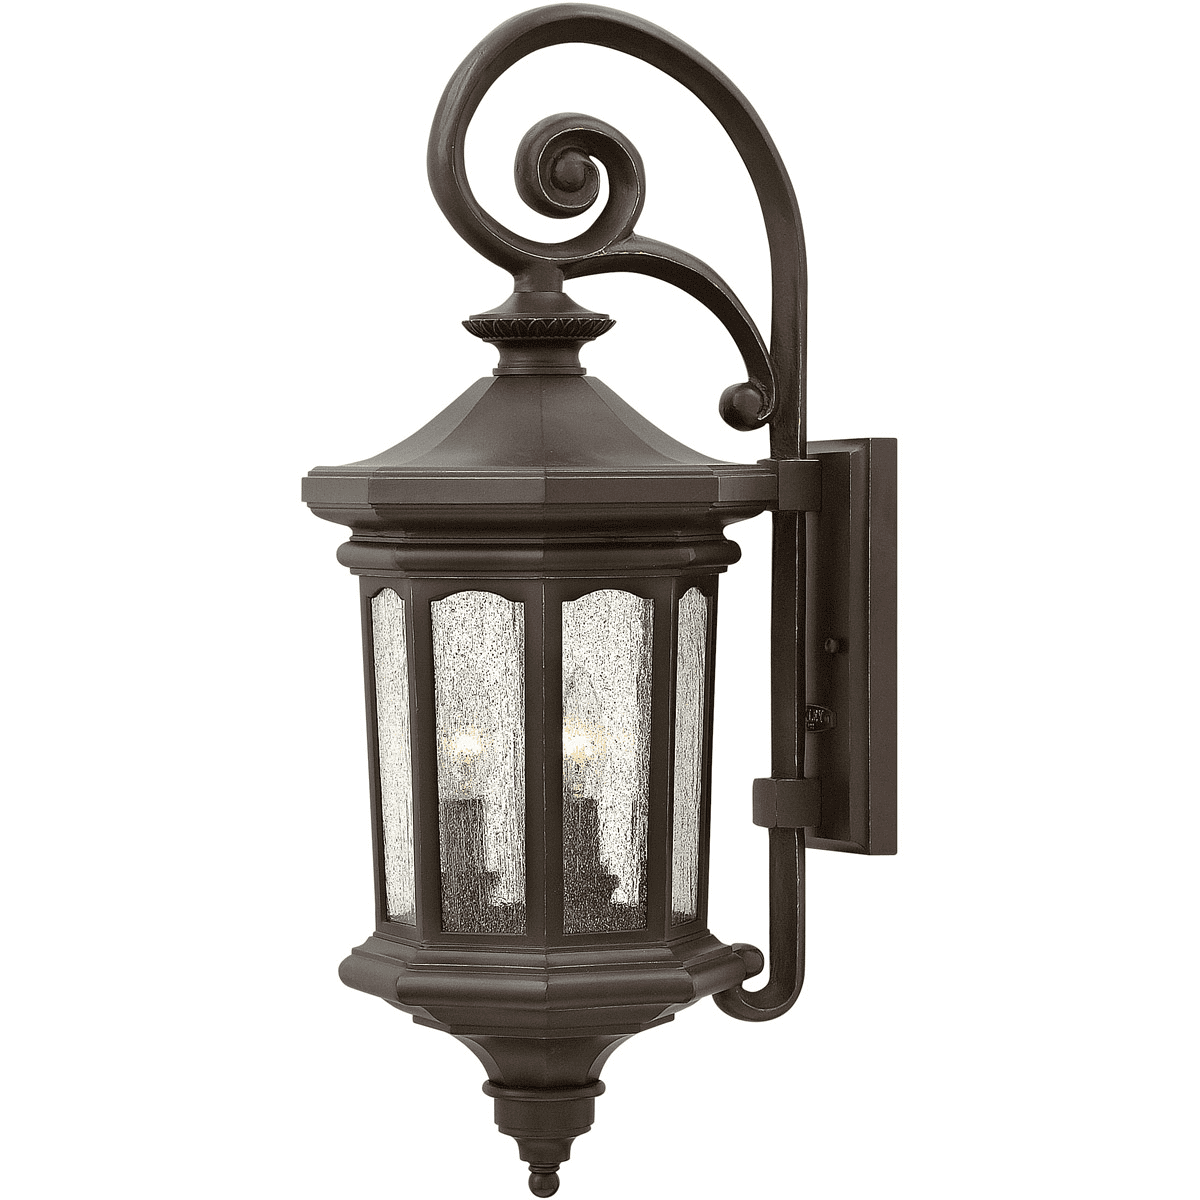 Wall Sconces 3 Light Bulb Fixture with Empire Bronze Finish Die Cast Aluminum Material Candelabra Bulbs 10 inch 120 Watts 